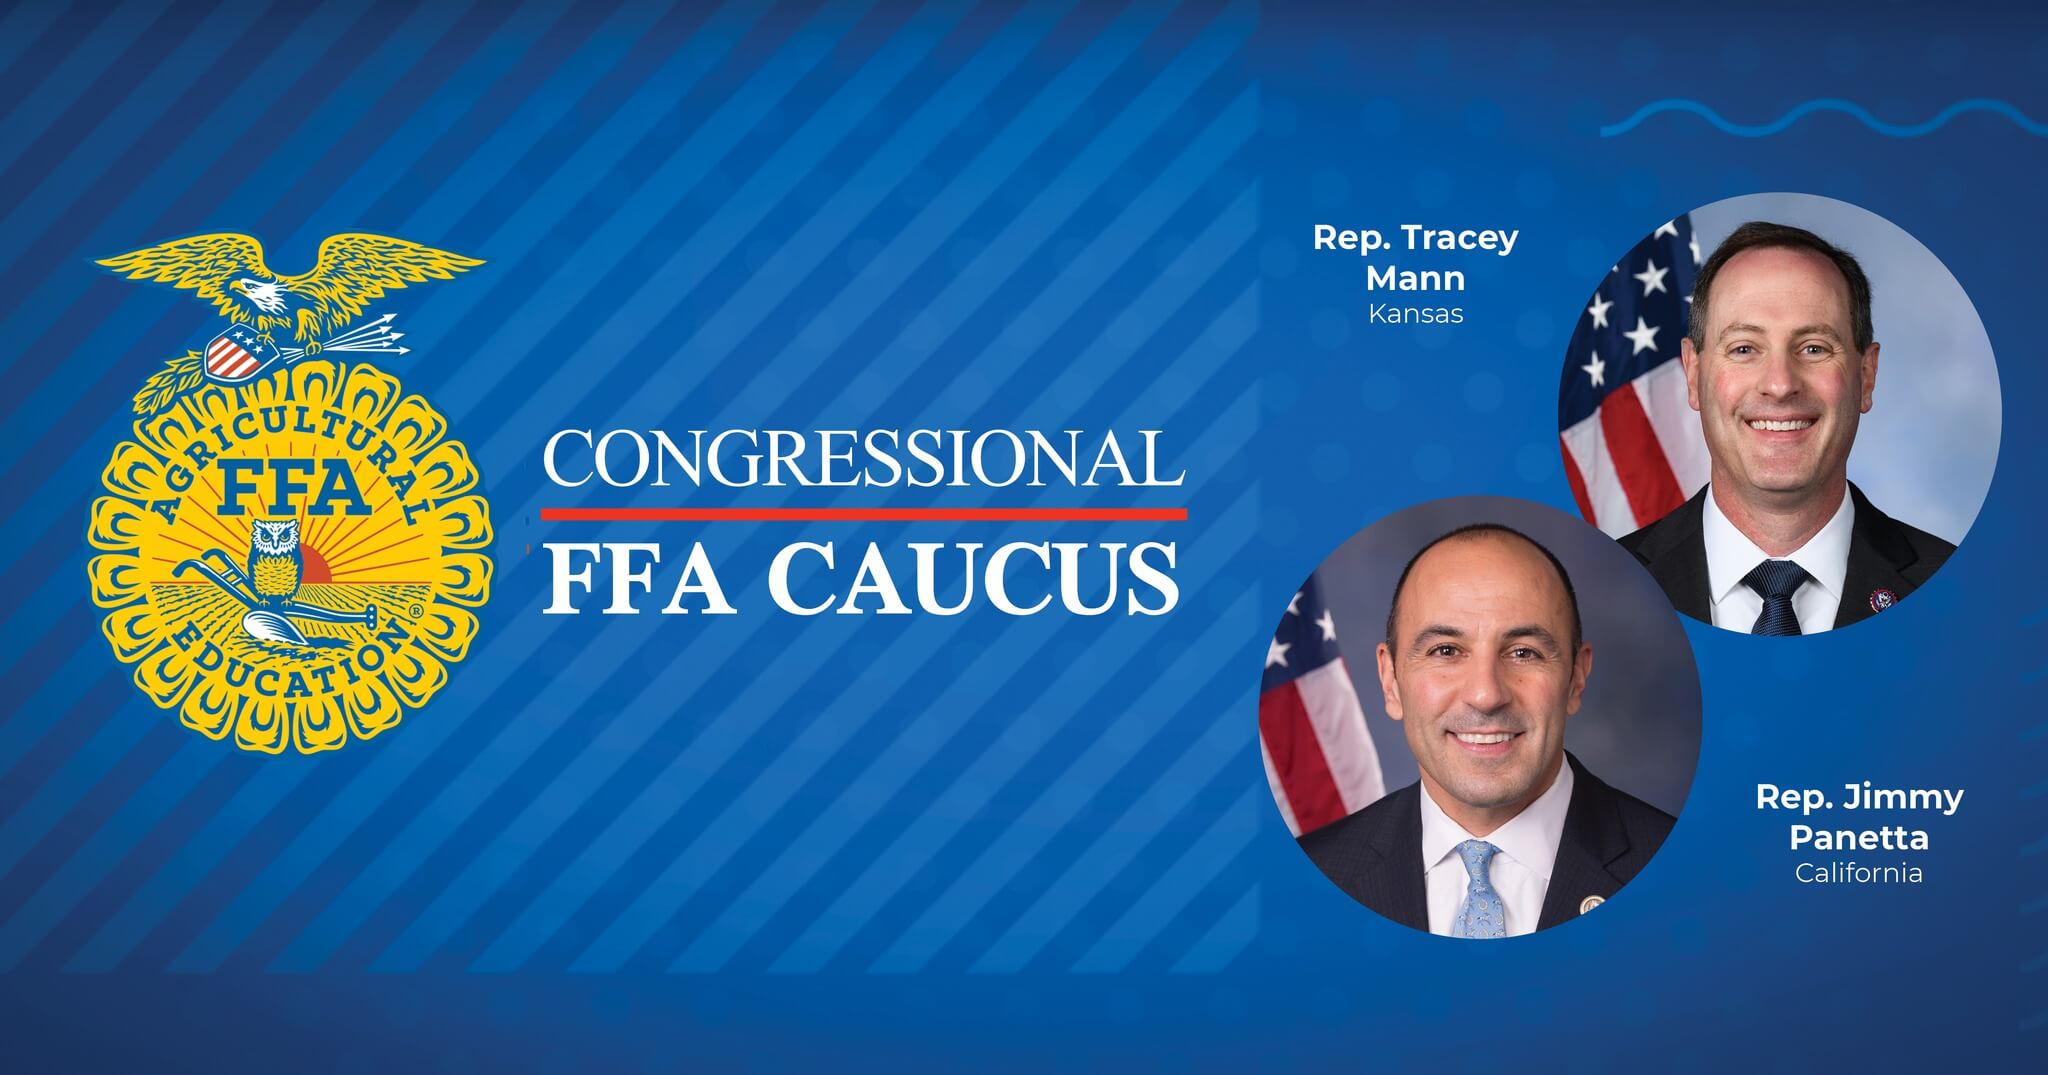 Image for New Congressional FFA Caucus Formed by Kansas Representative